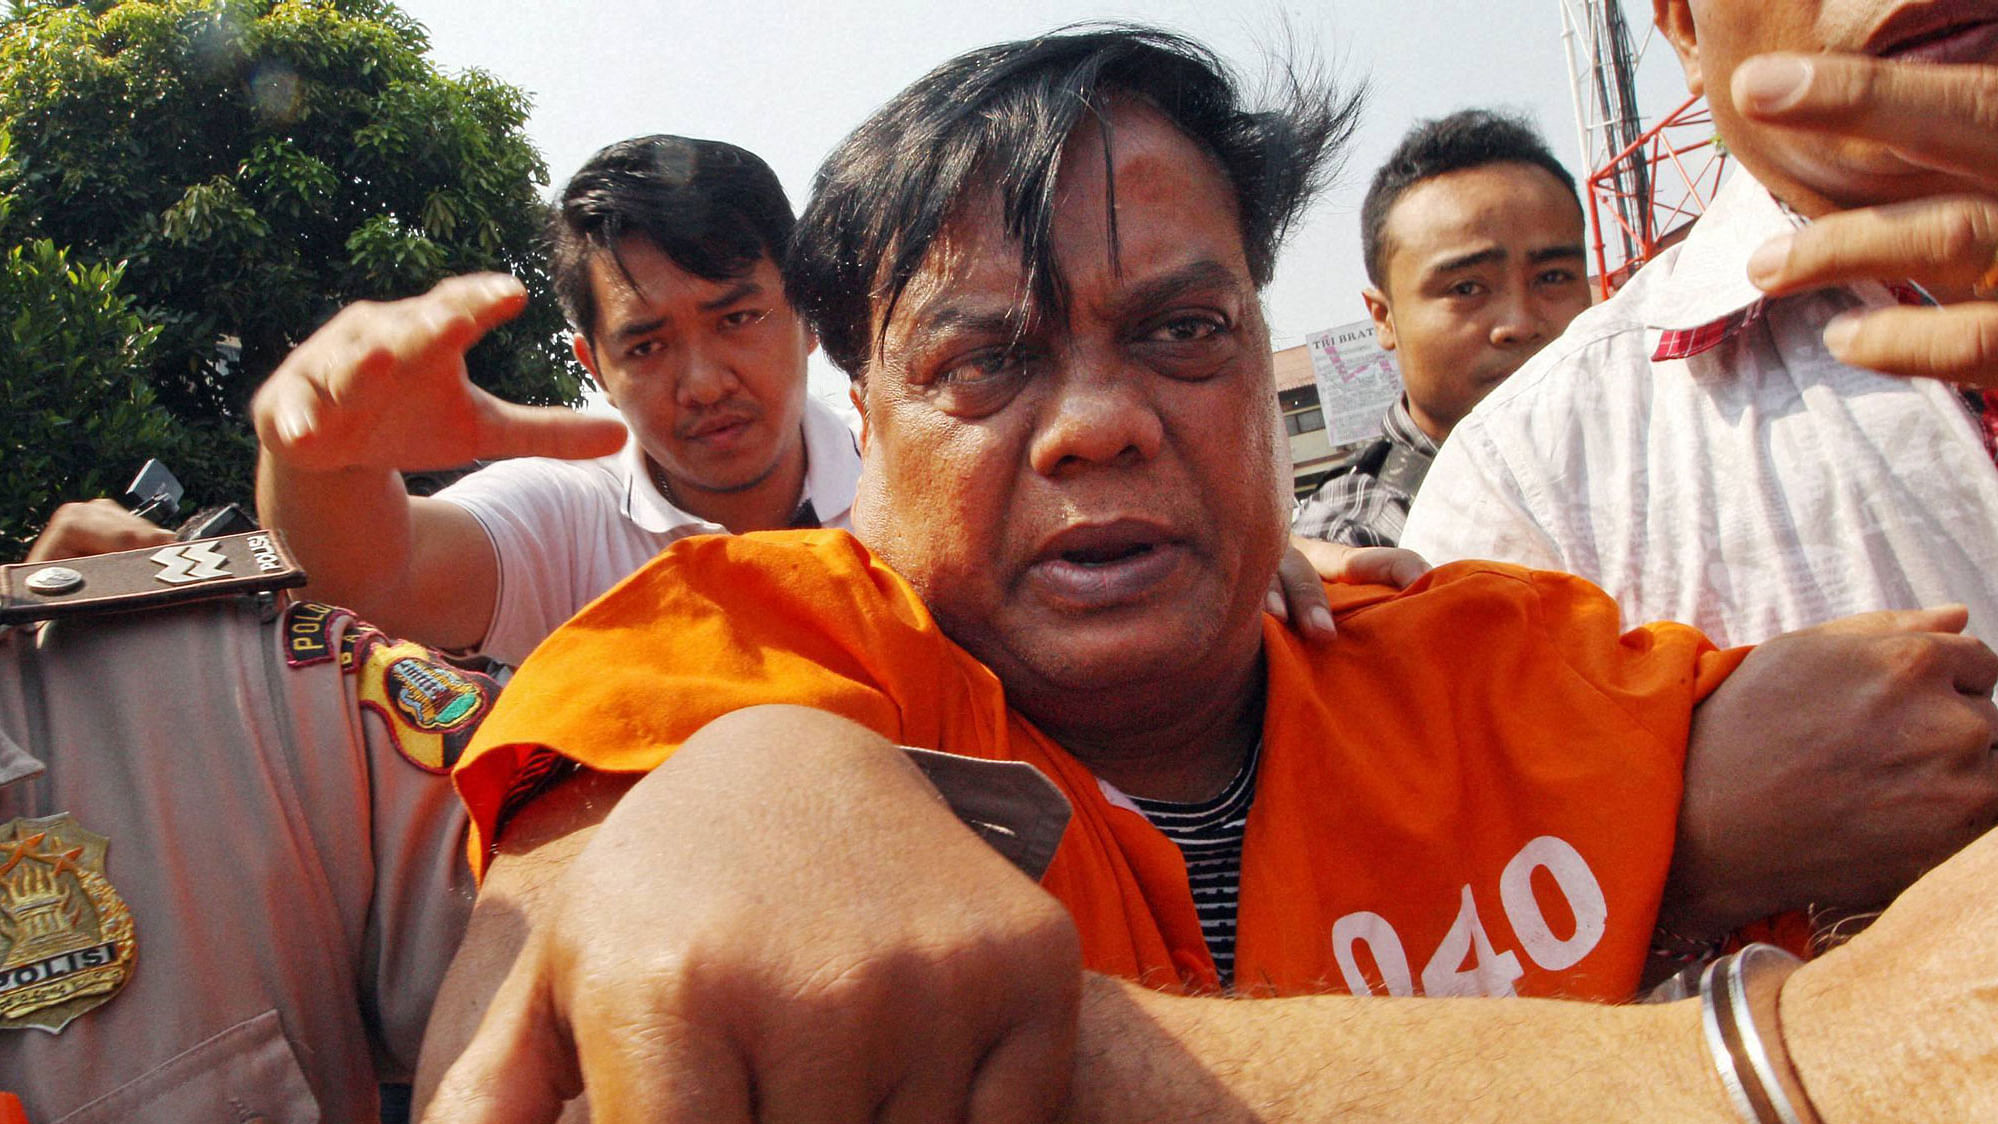 Rajendra Sadashiv Nikalje, known in India as Chhota Rajan, escorted by plain-clothed police officers for questioning in Bali, Indonesia. (Photo: PTI)